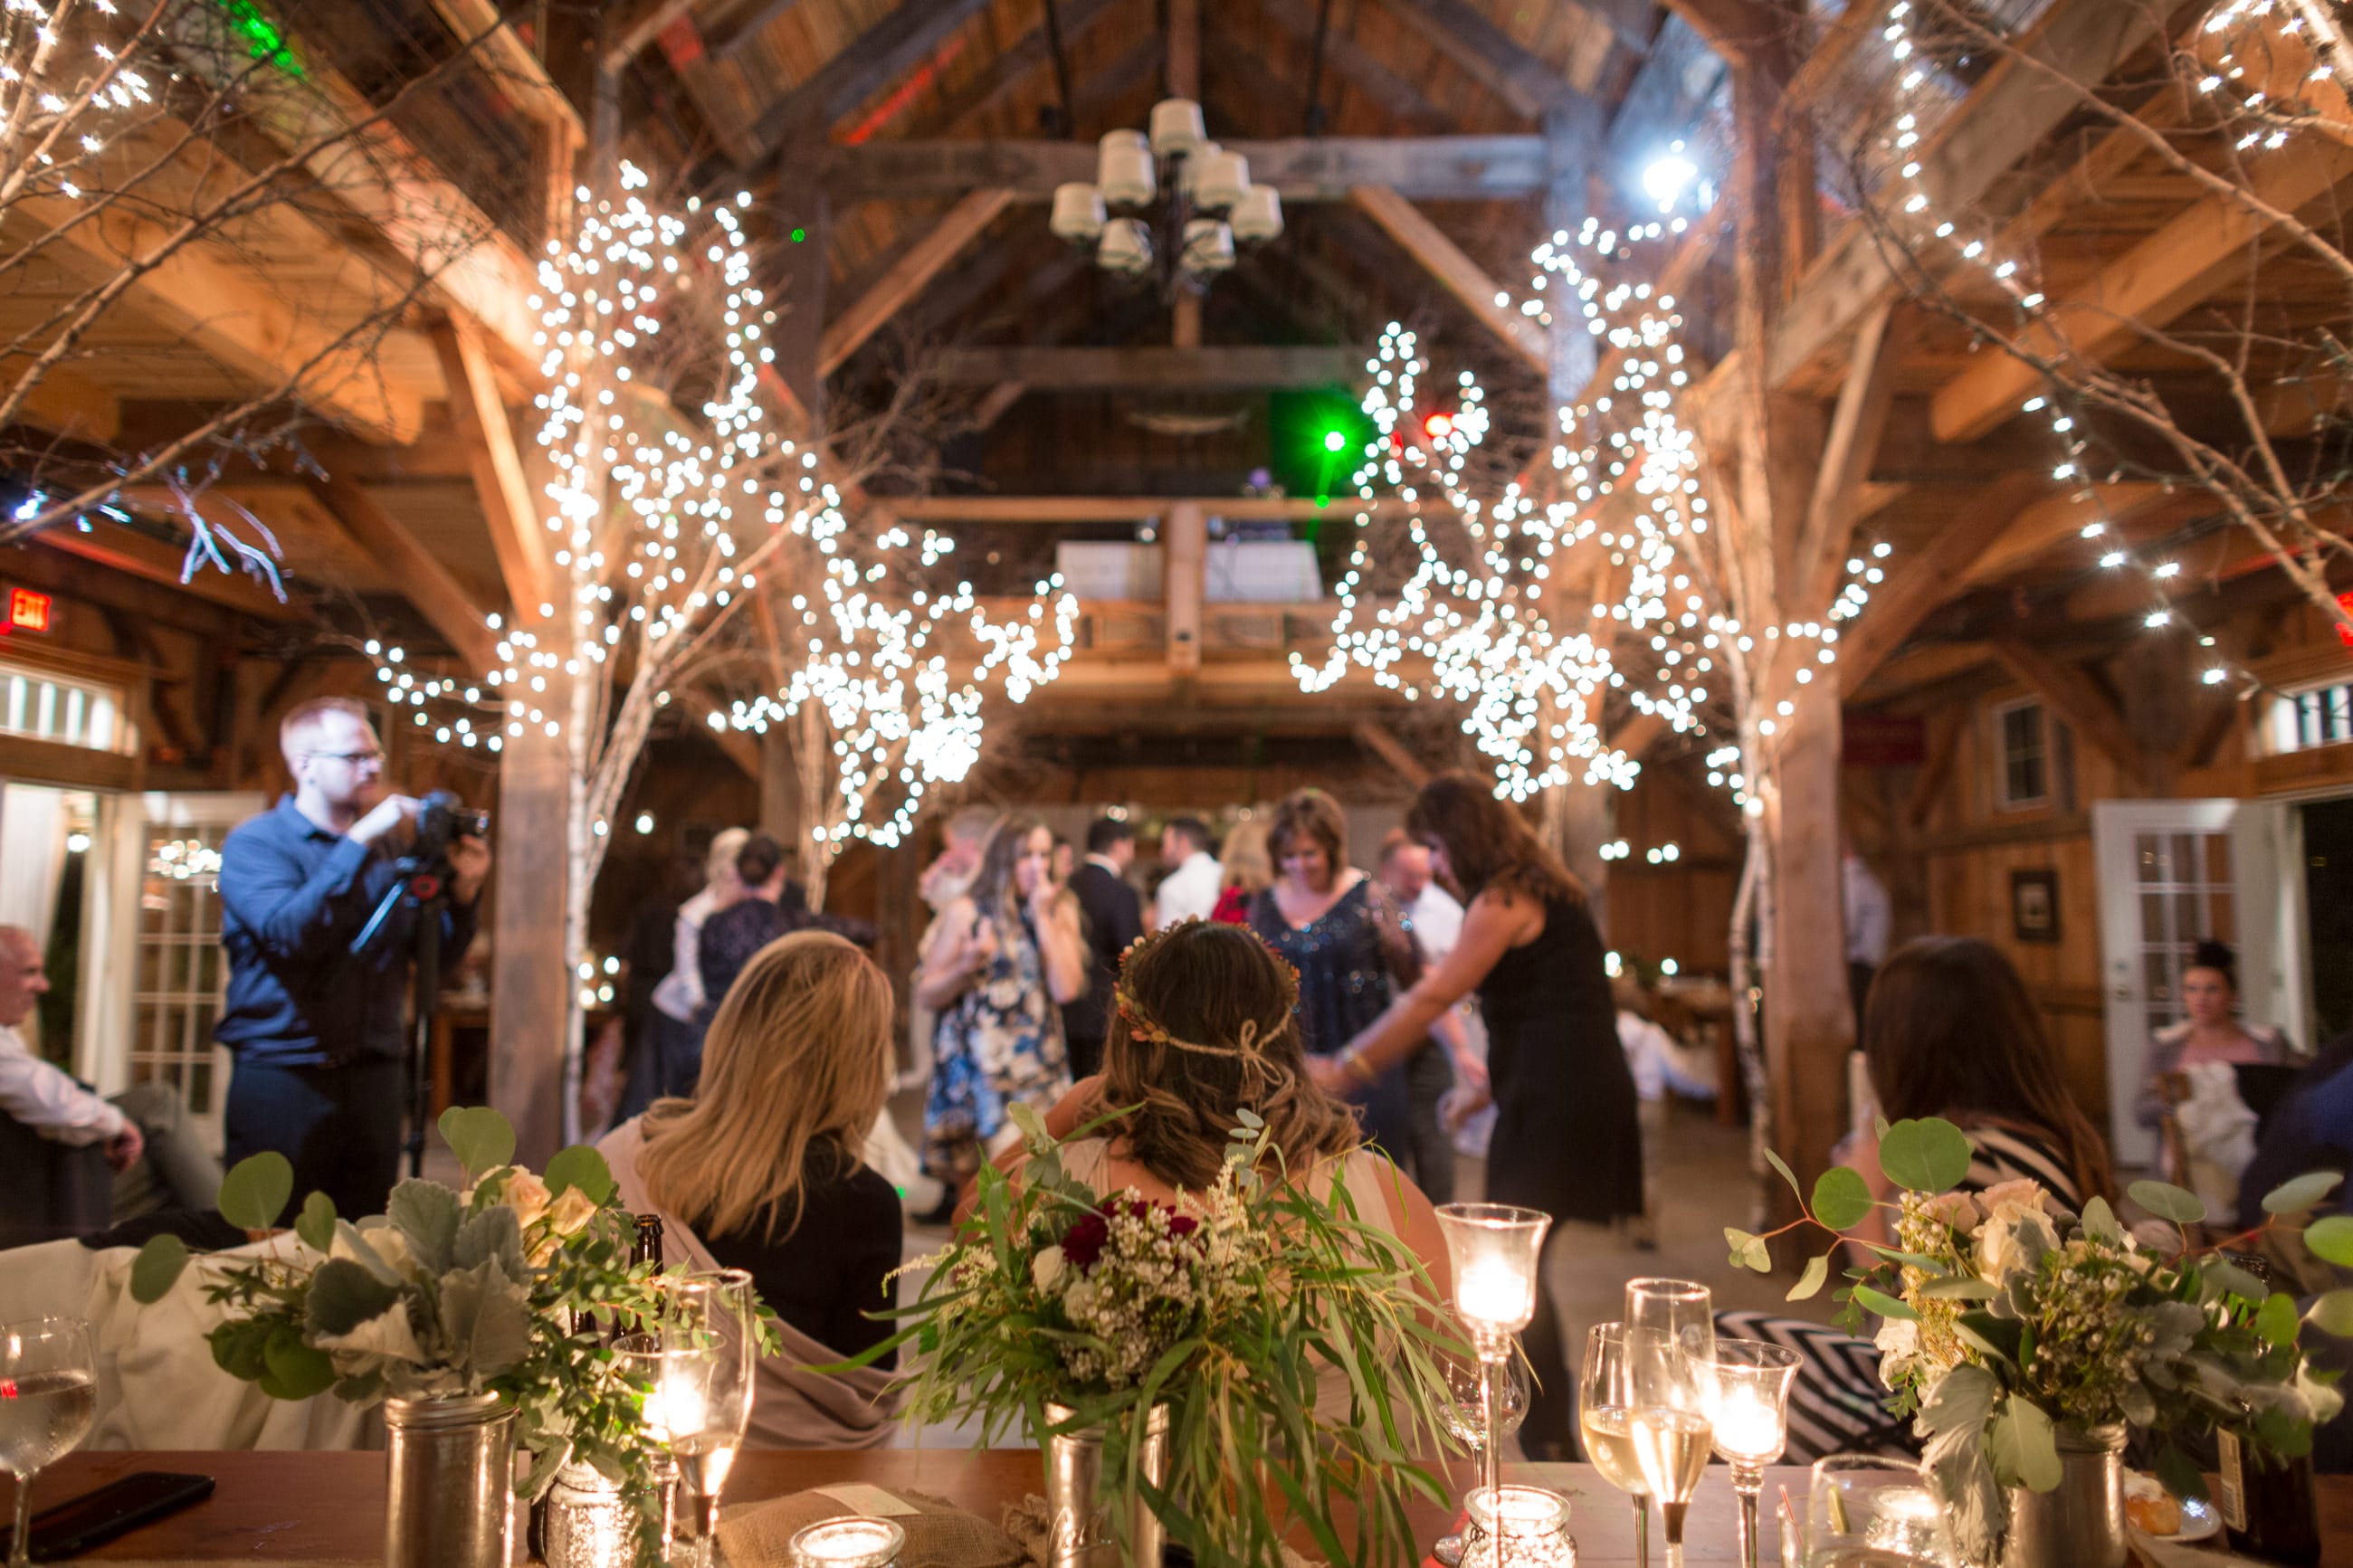 7 Wedding Themes for 2017 - Rustic Barn and Enchanting Details